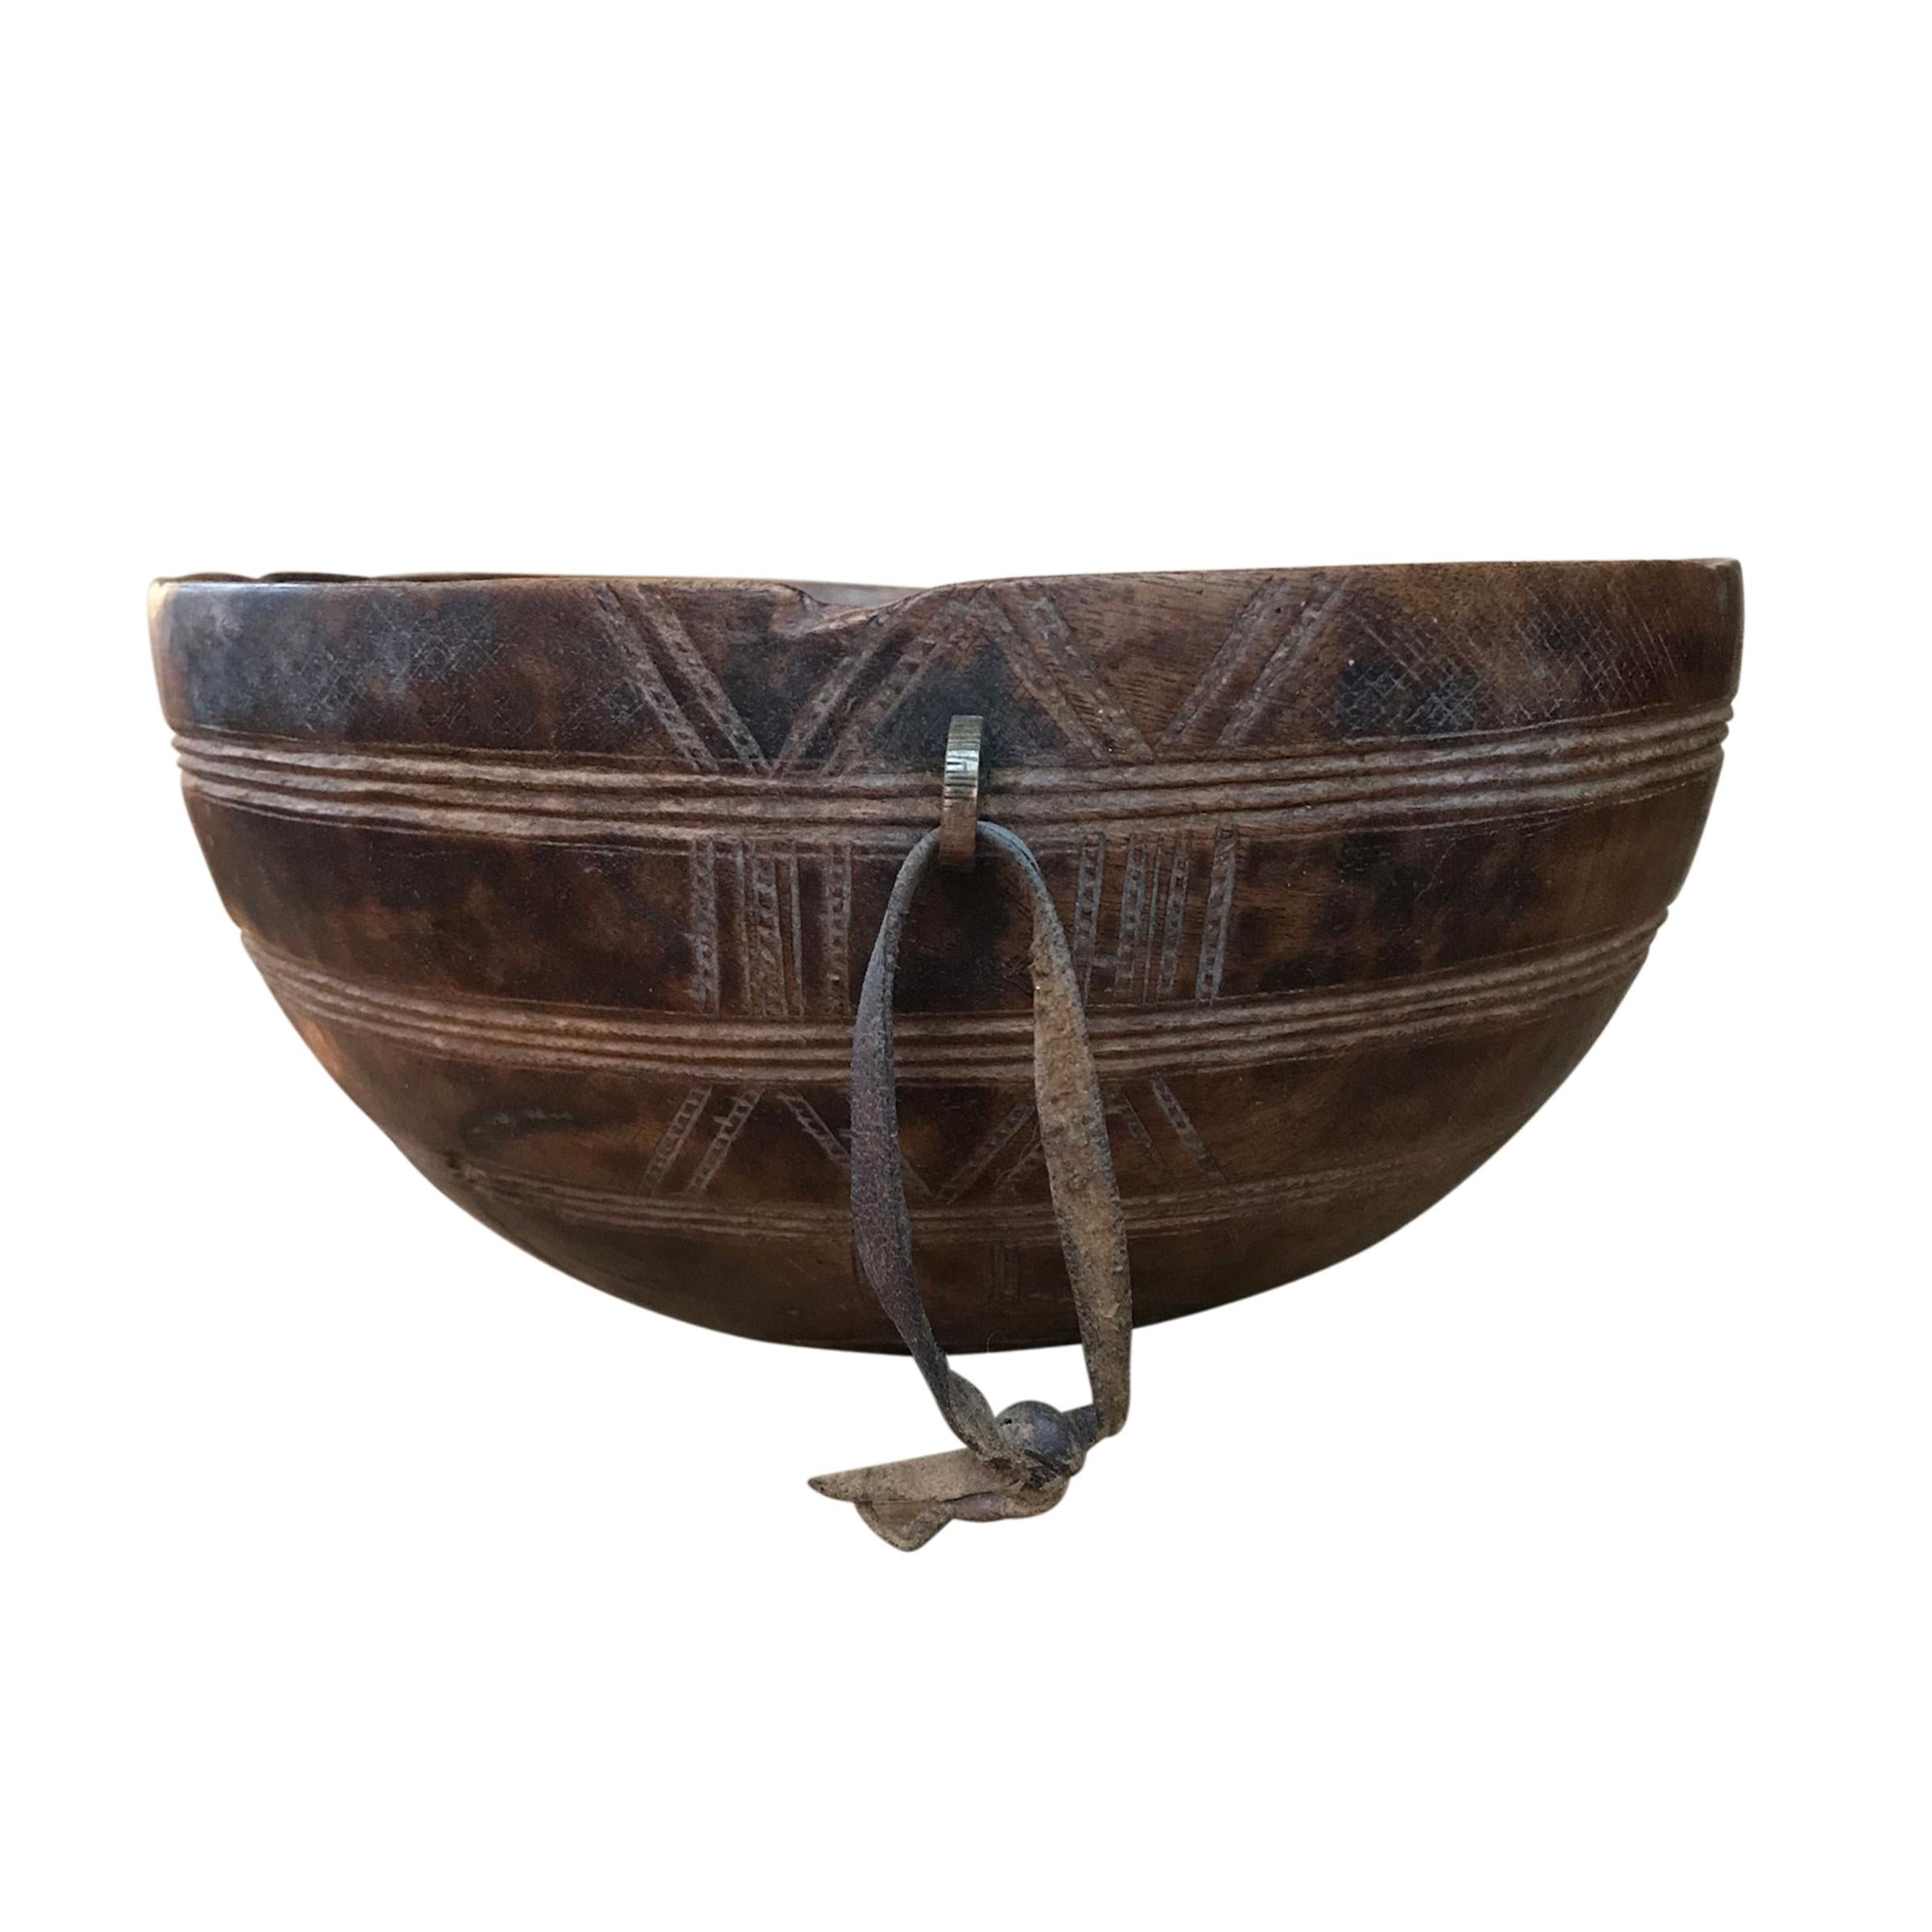 An early 20th century Tuareg bowl carved on a single piece of wood incised with a geometric pattern, and with a small brass ring with a leather strap. The Tuareg are nomadic pastoralists who inhabit the Saharan region of Northern Africa. Because so